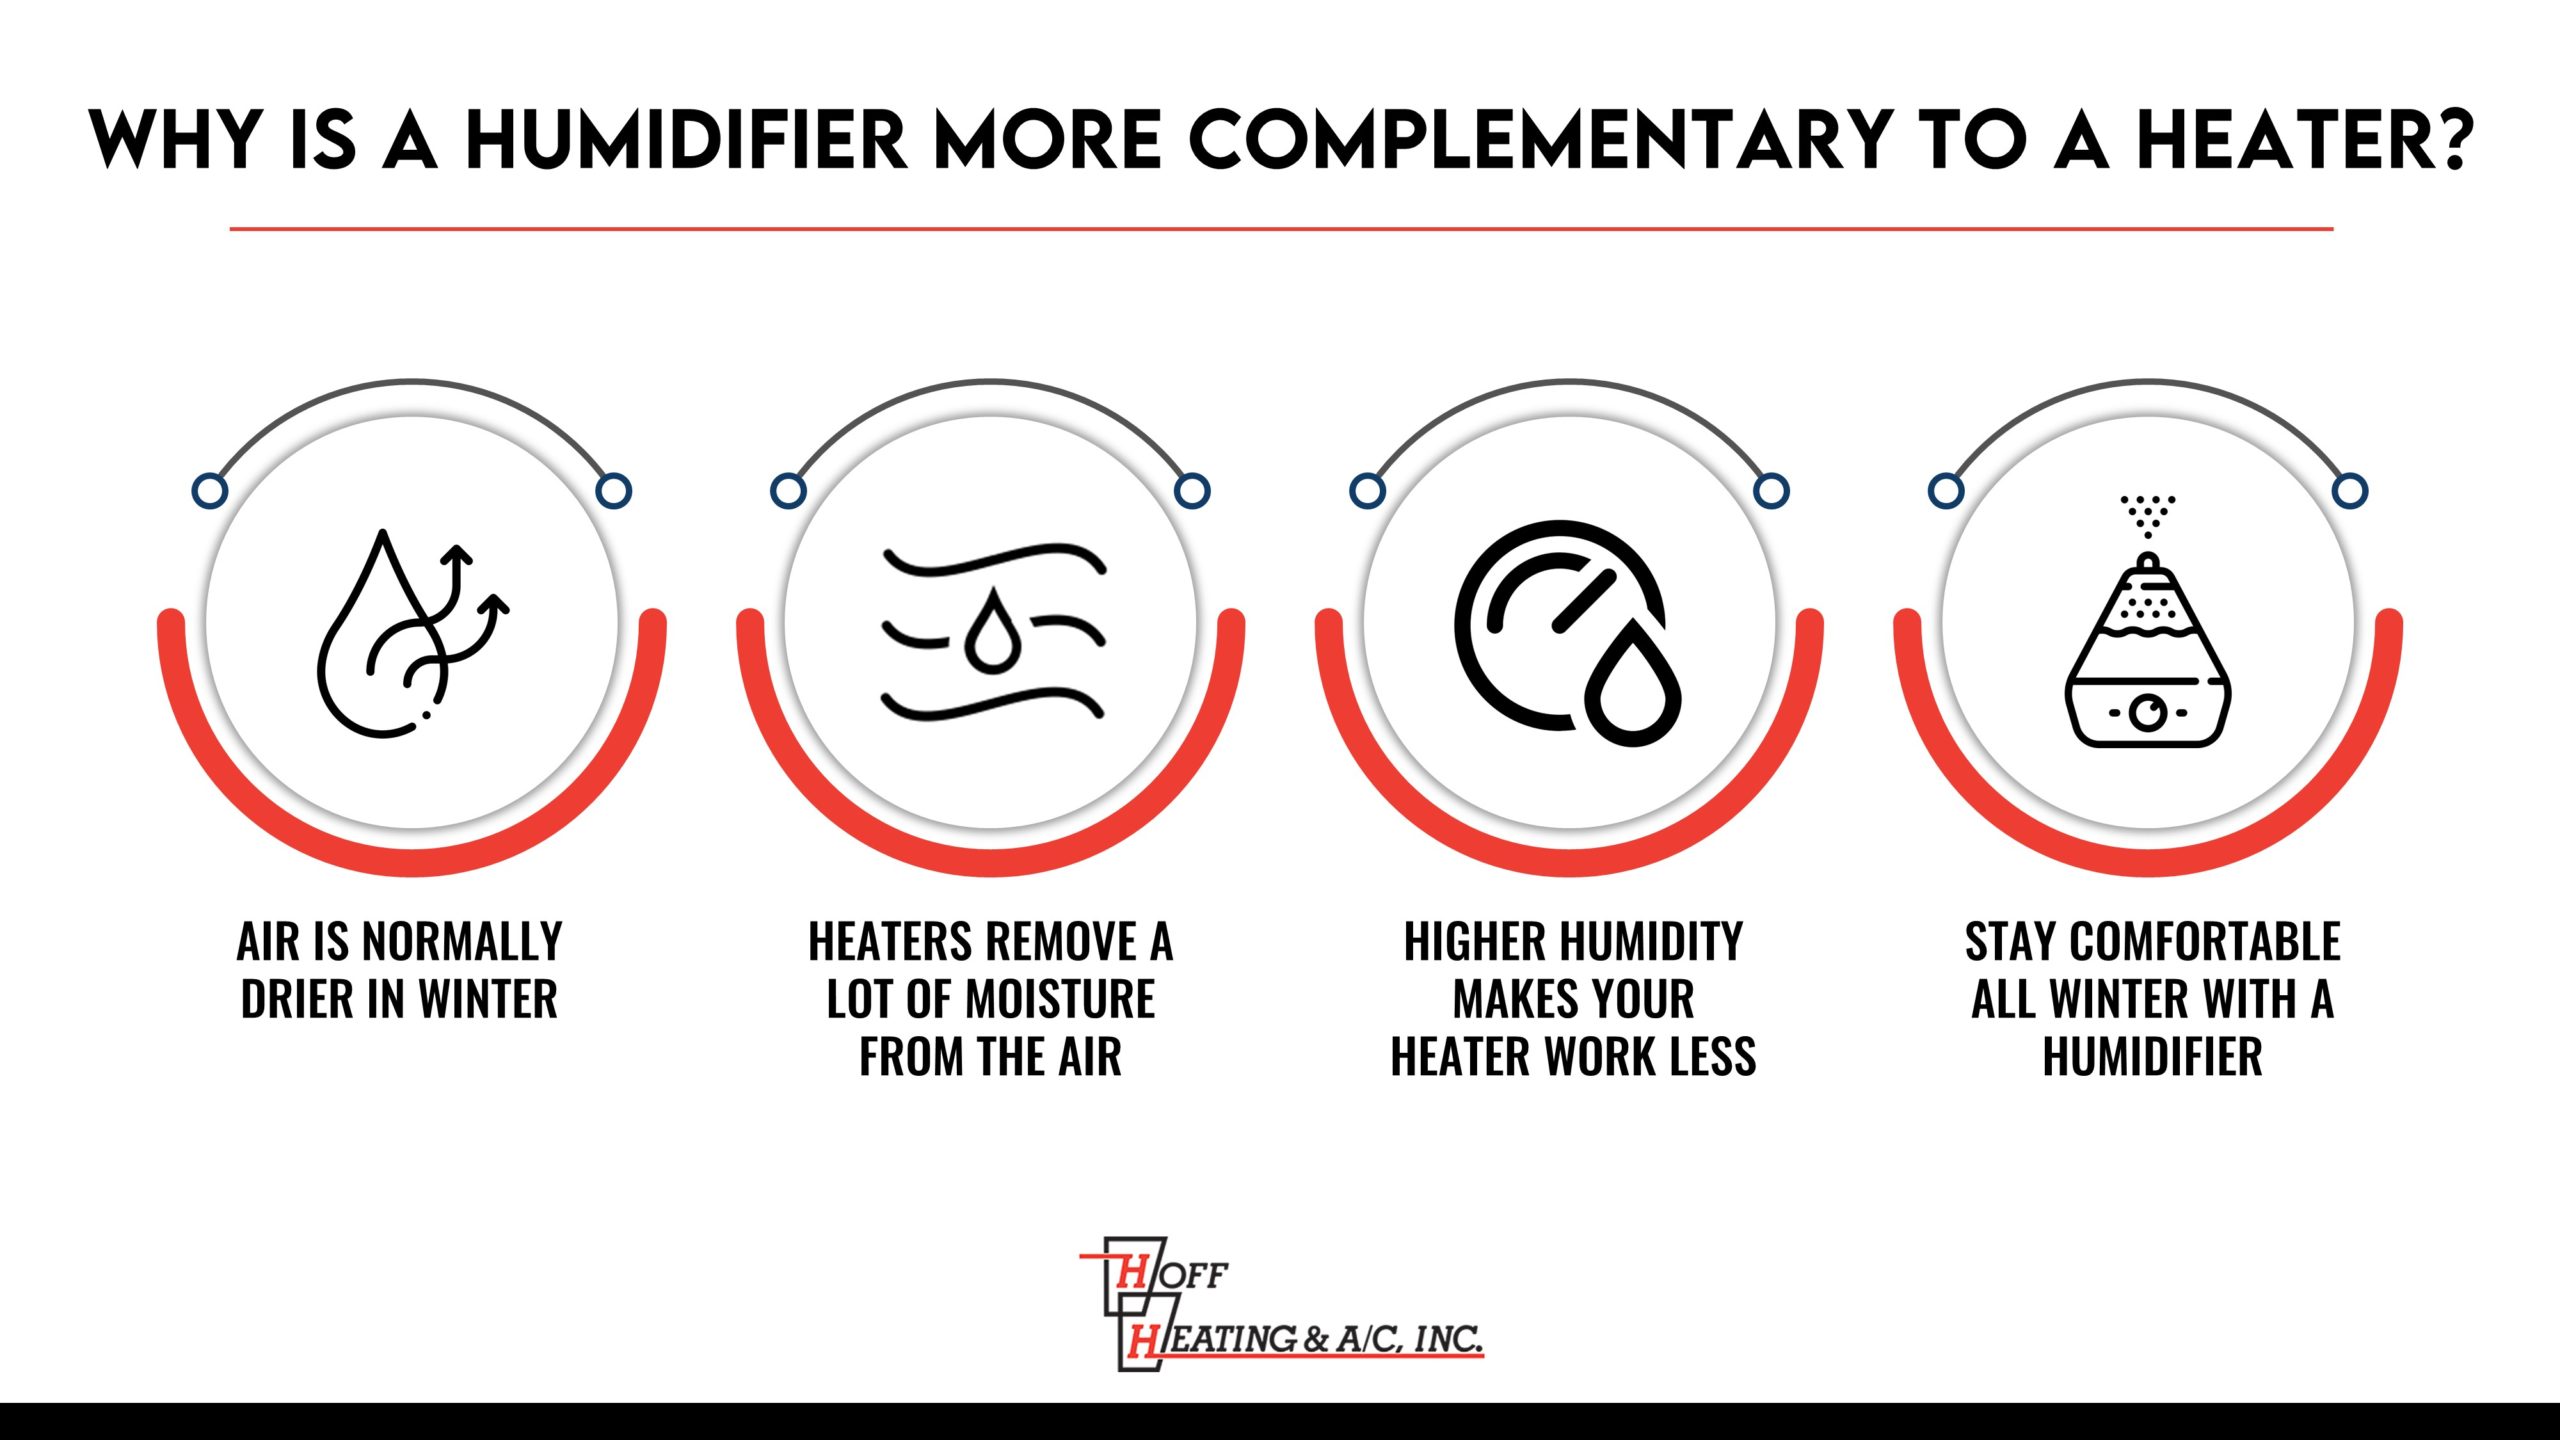 Do you have a humidifier on your furnace? What do have your